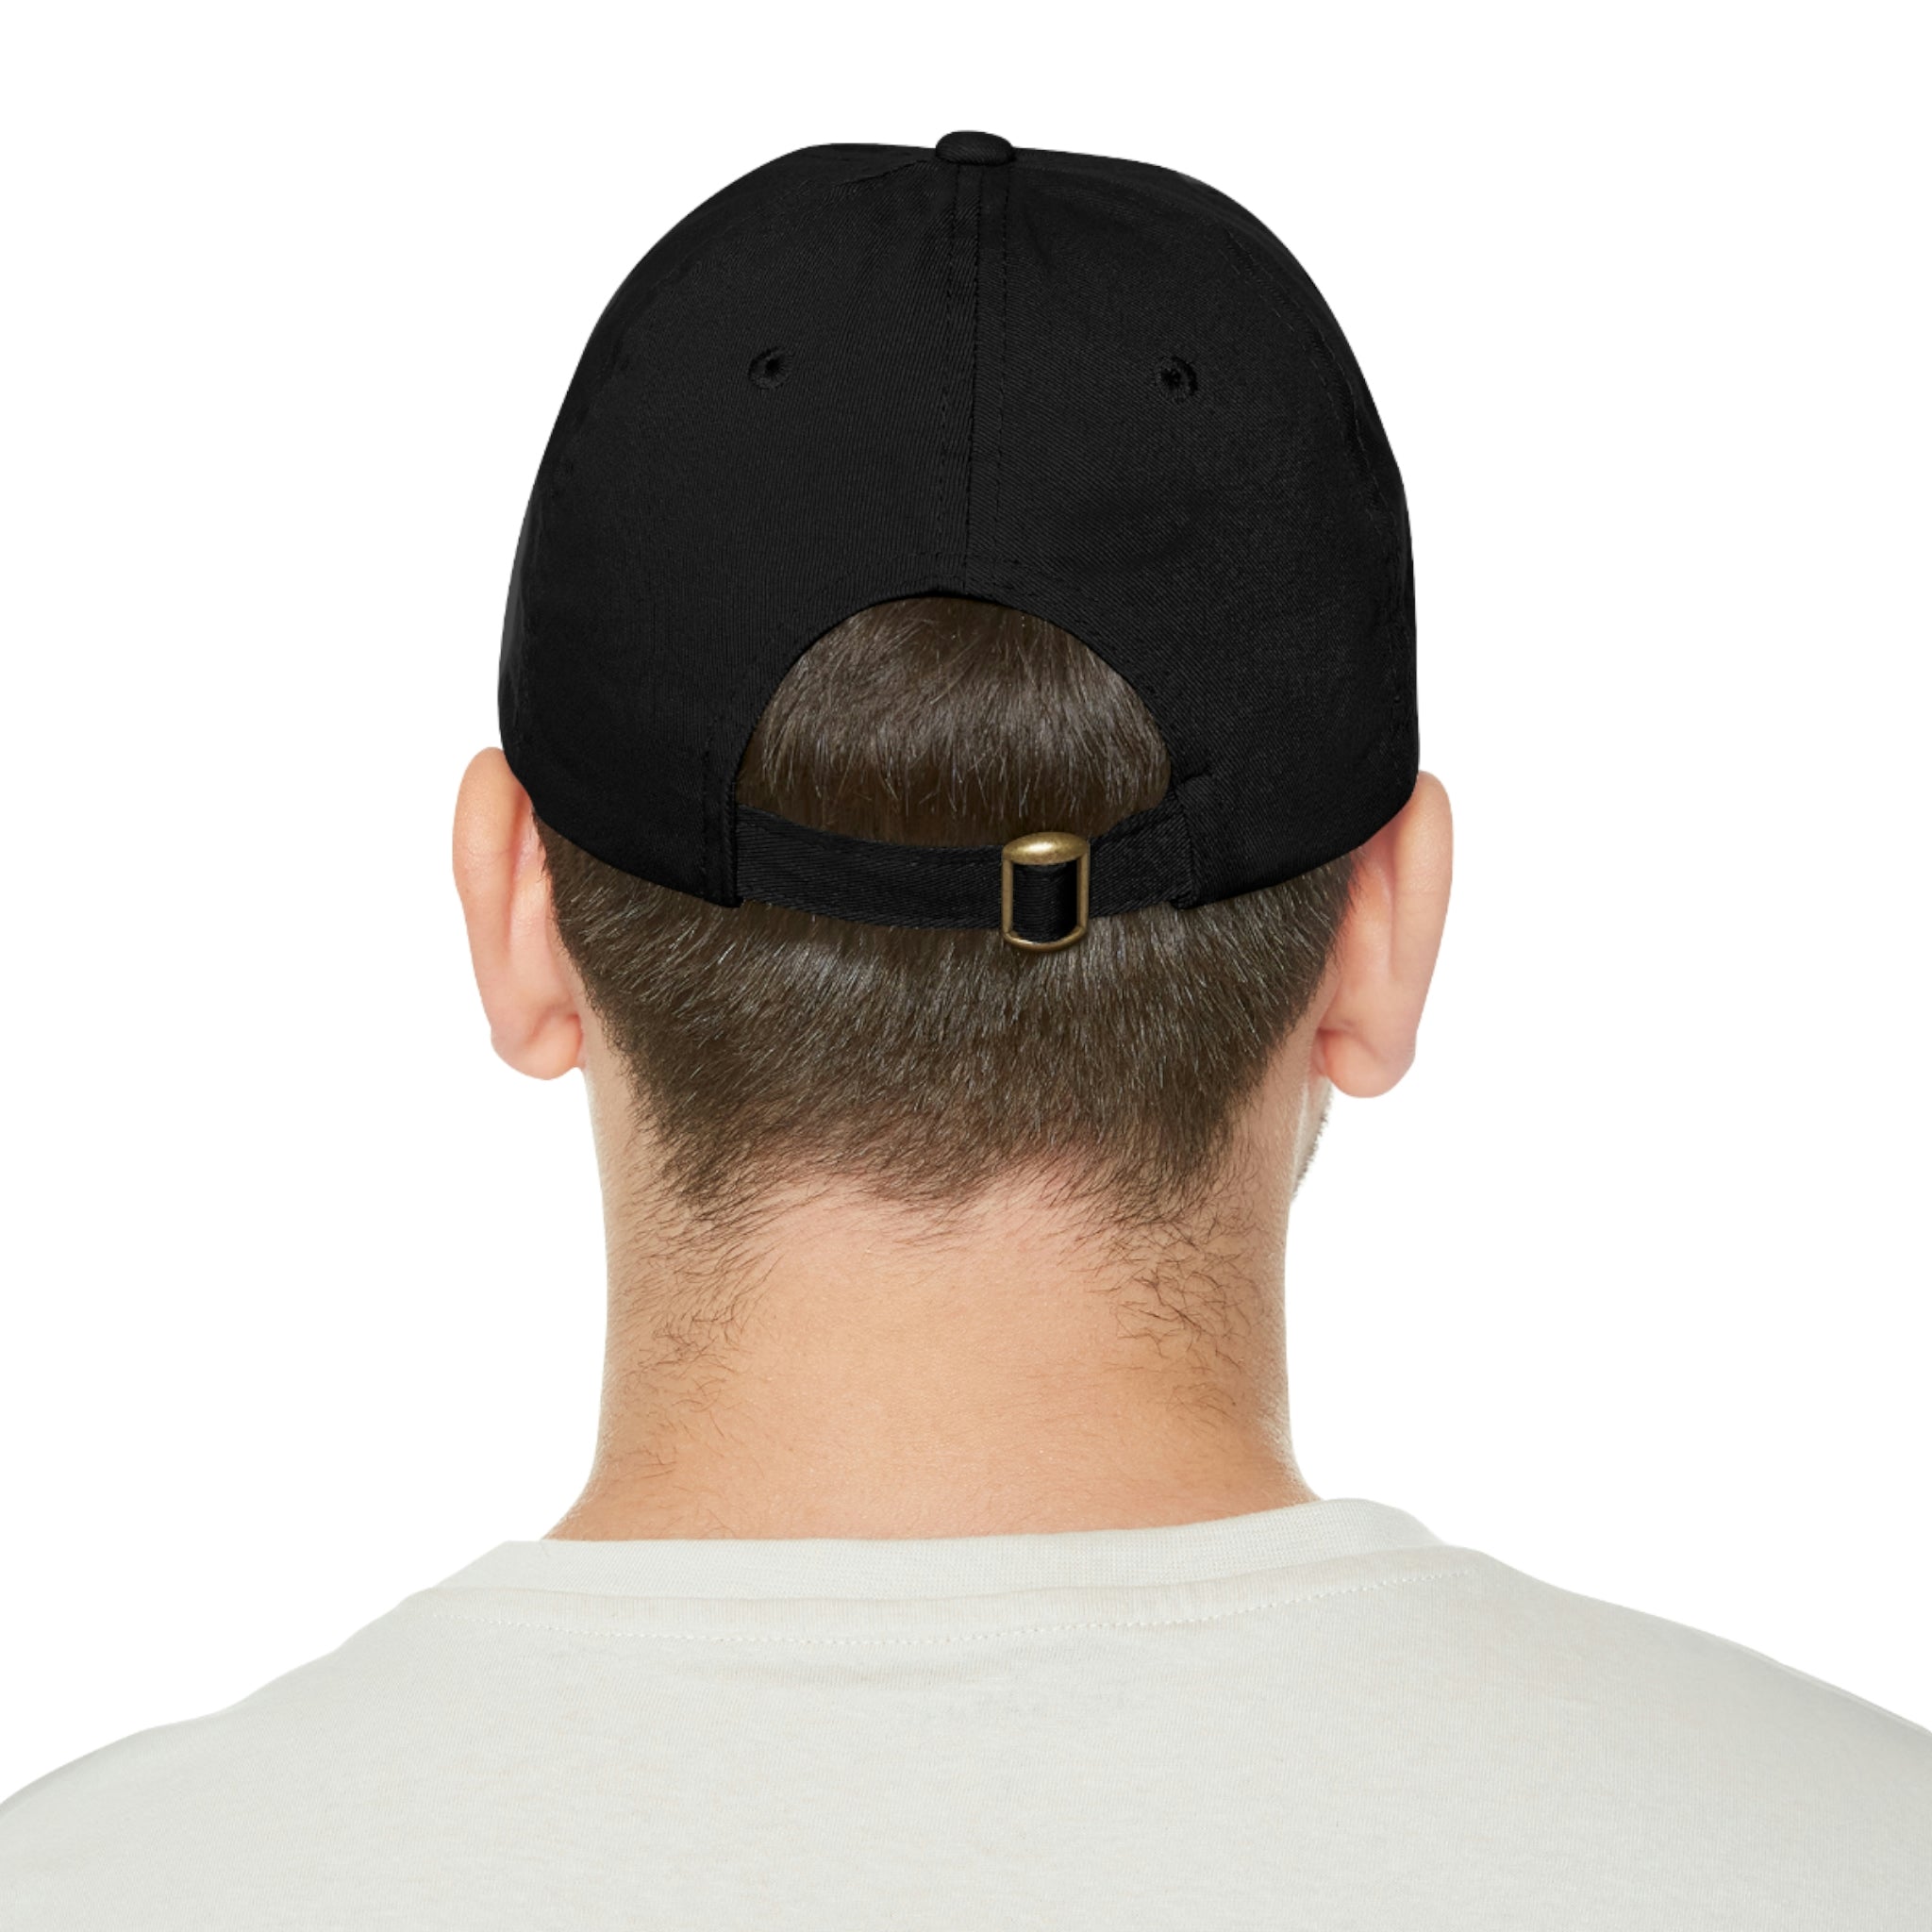 Inspire Hat with Leather Patch